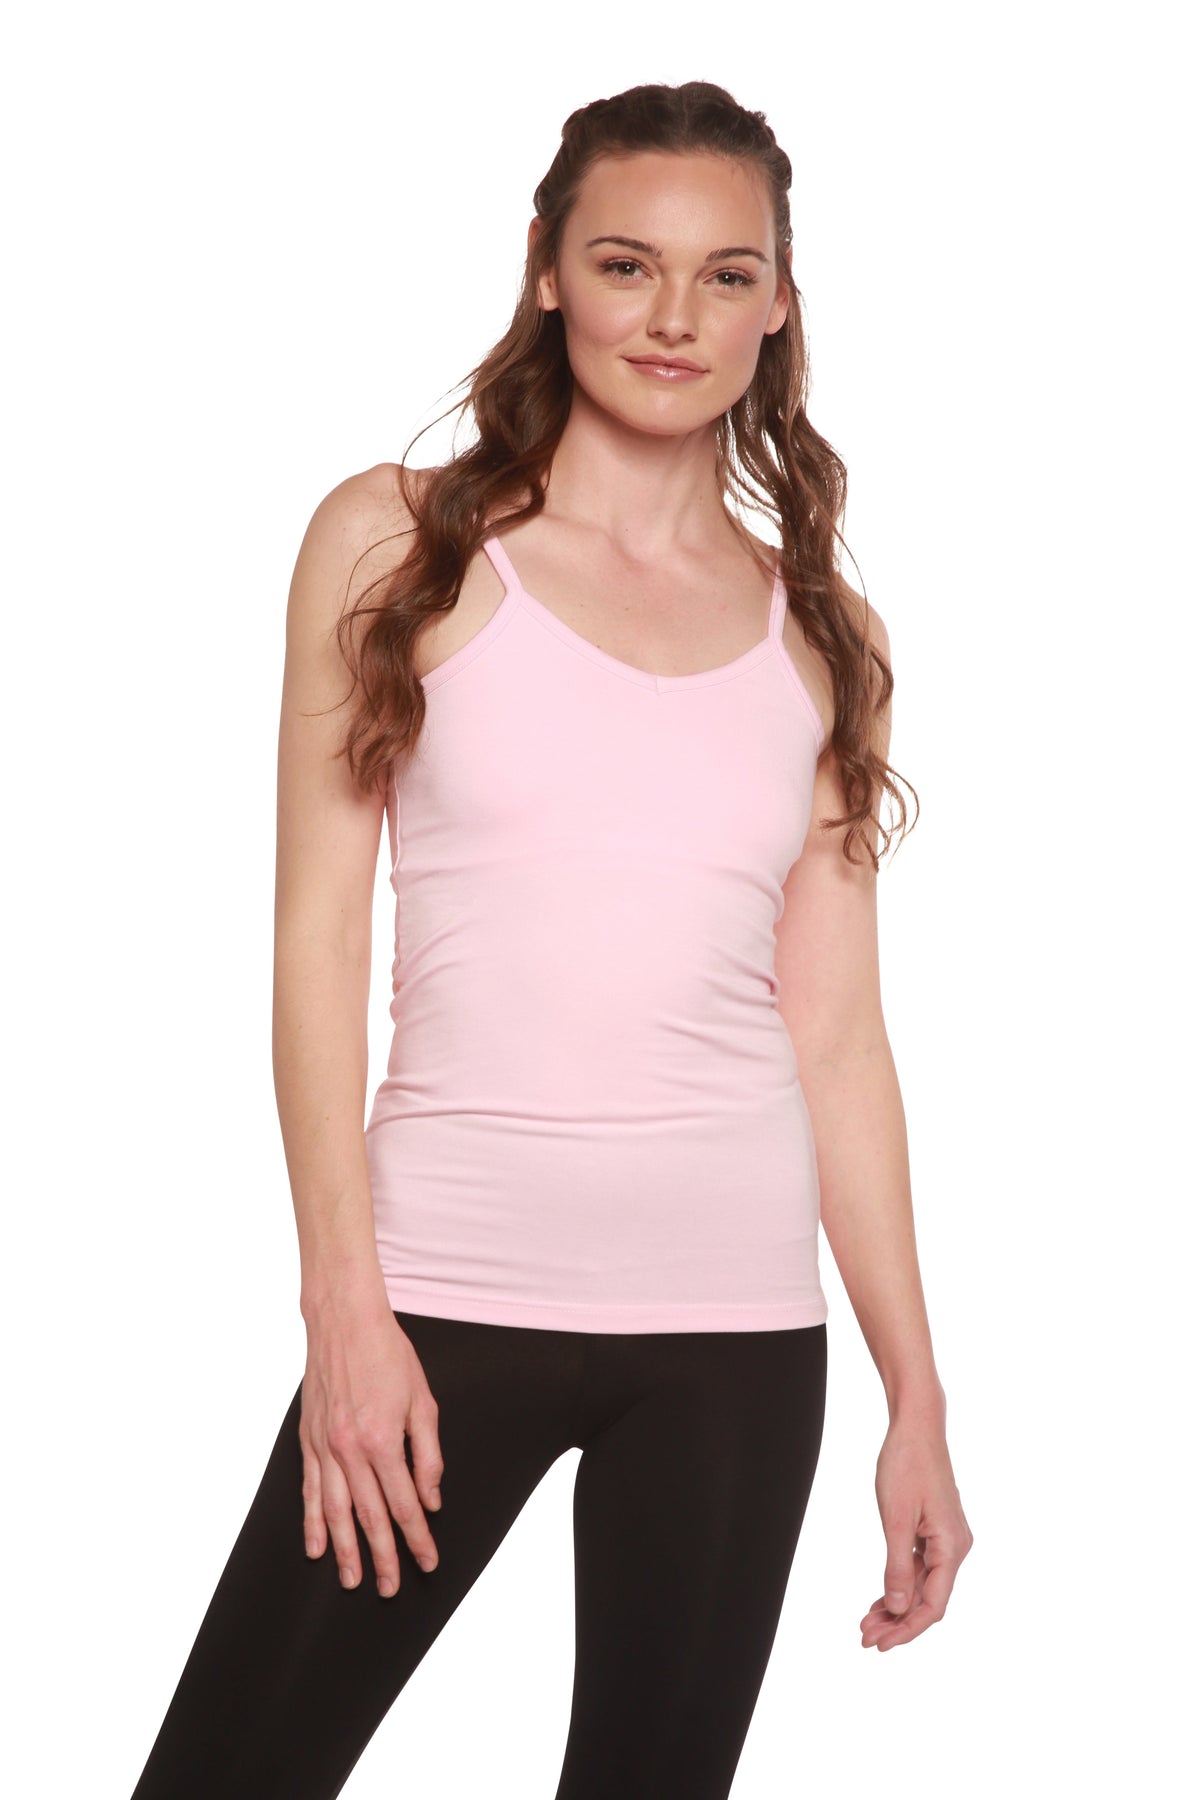 Buy V FOR CITY Cotton Shelf Bra Camisoles Adjustable Spaghetti Strap Tank  Tops Scoop Neck Layer Cami S-5X, White/Pink, Large at